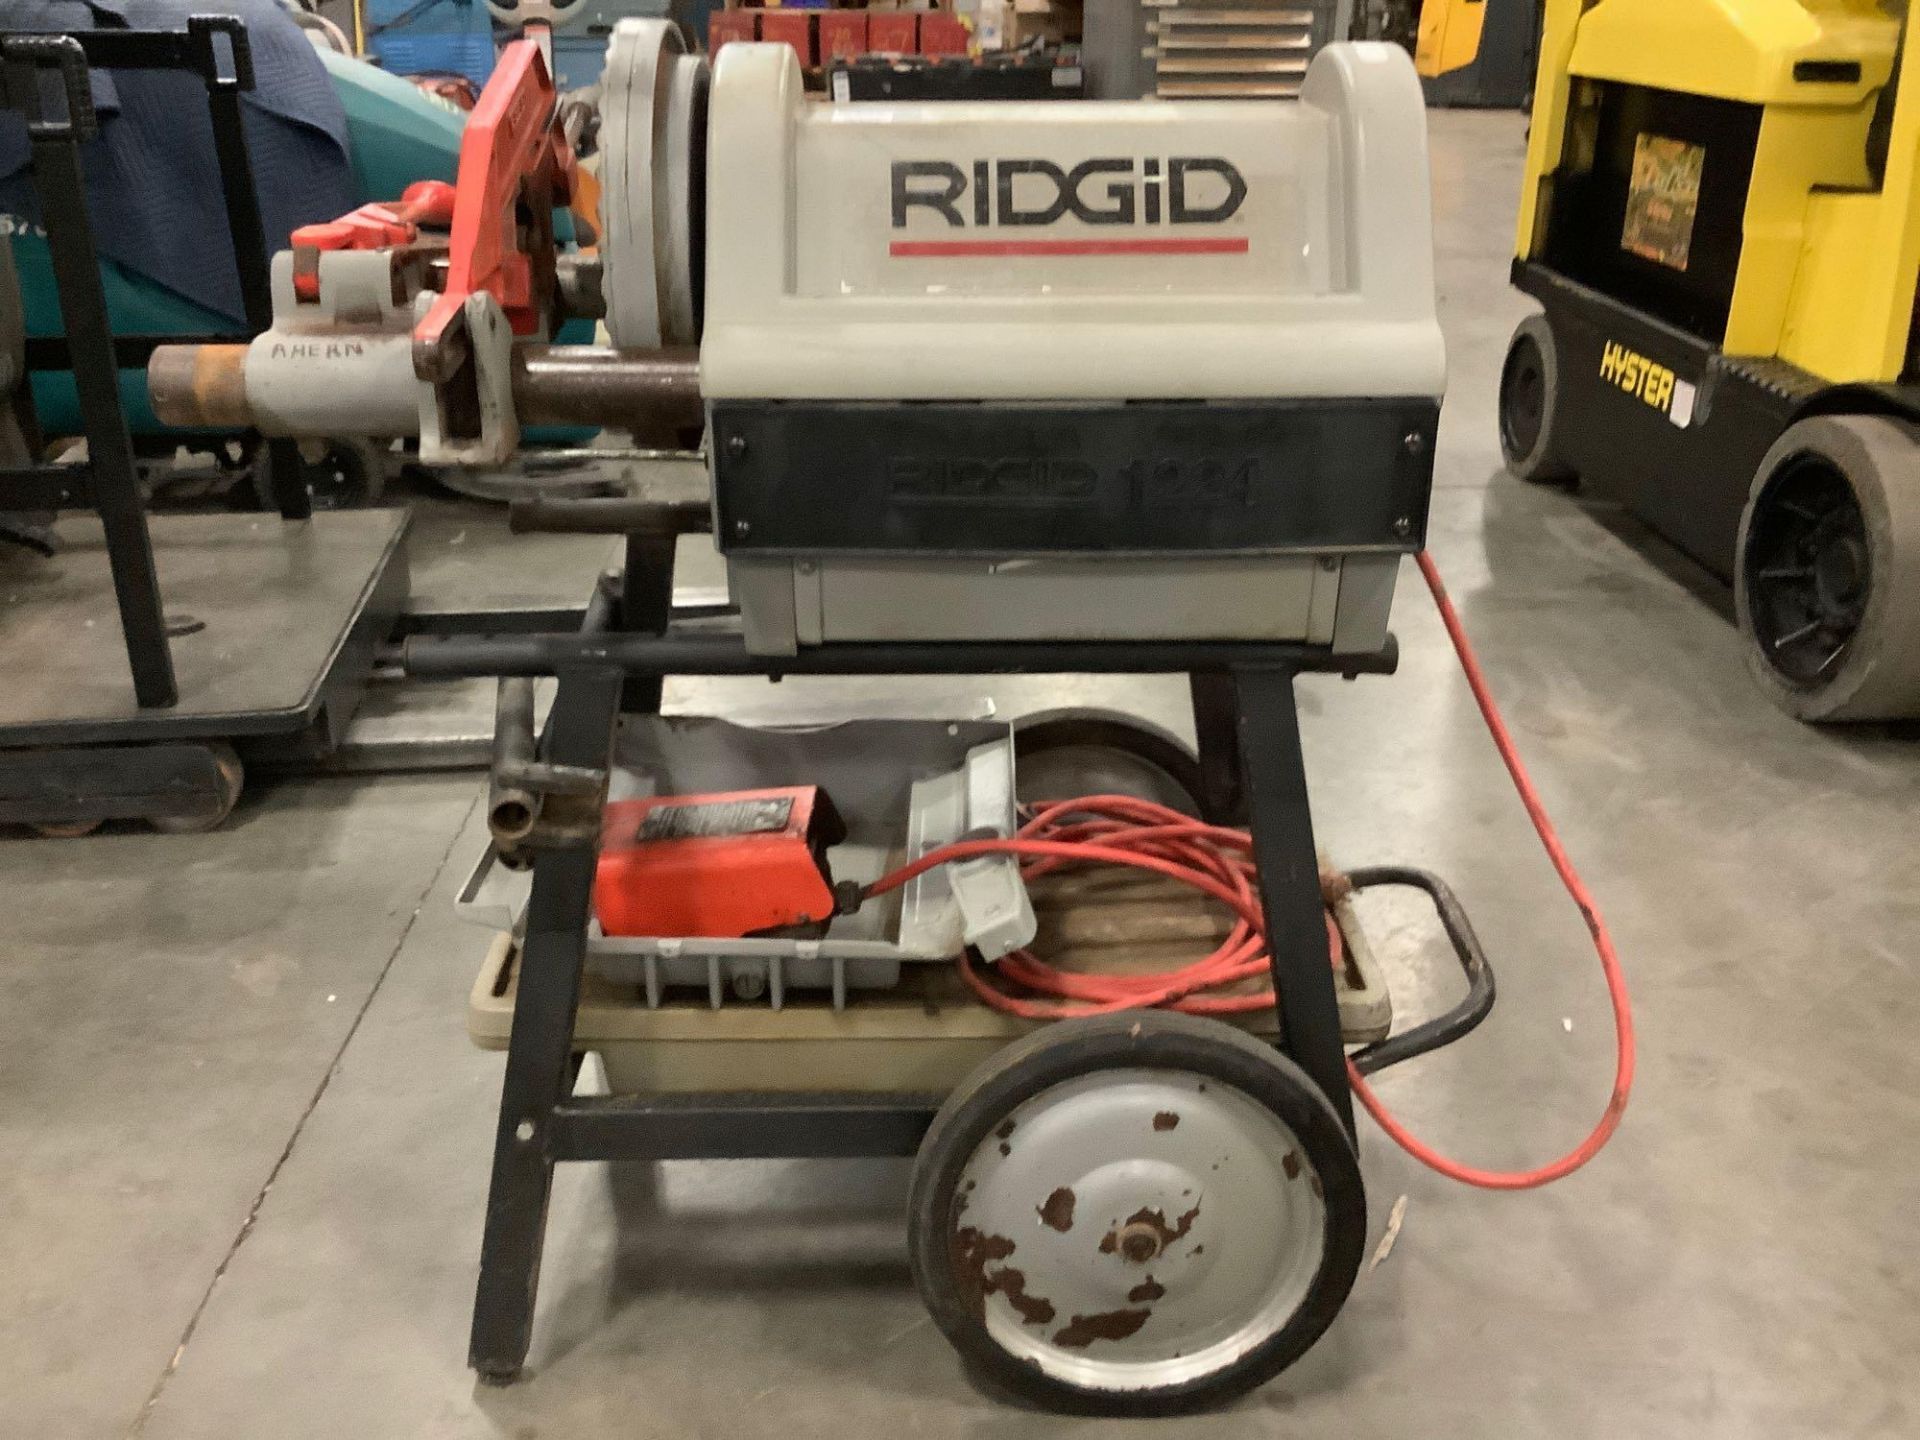 2013 ELECTRIC RIDGID PIPE THREADER MODEL 1224 WITH STAND, APPROX 120 VOLTS,APPROX AMP 15,APPROX HZ 6 - Image 2 of 10